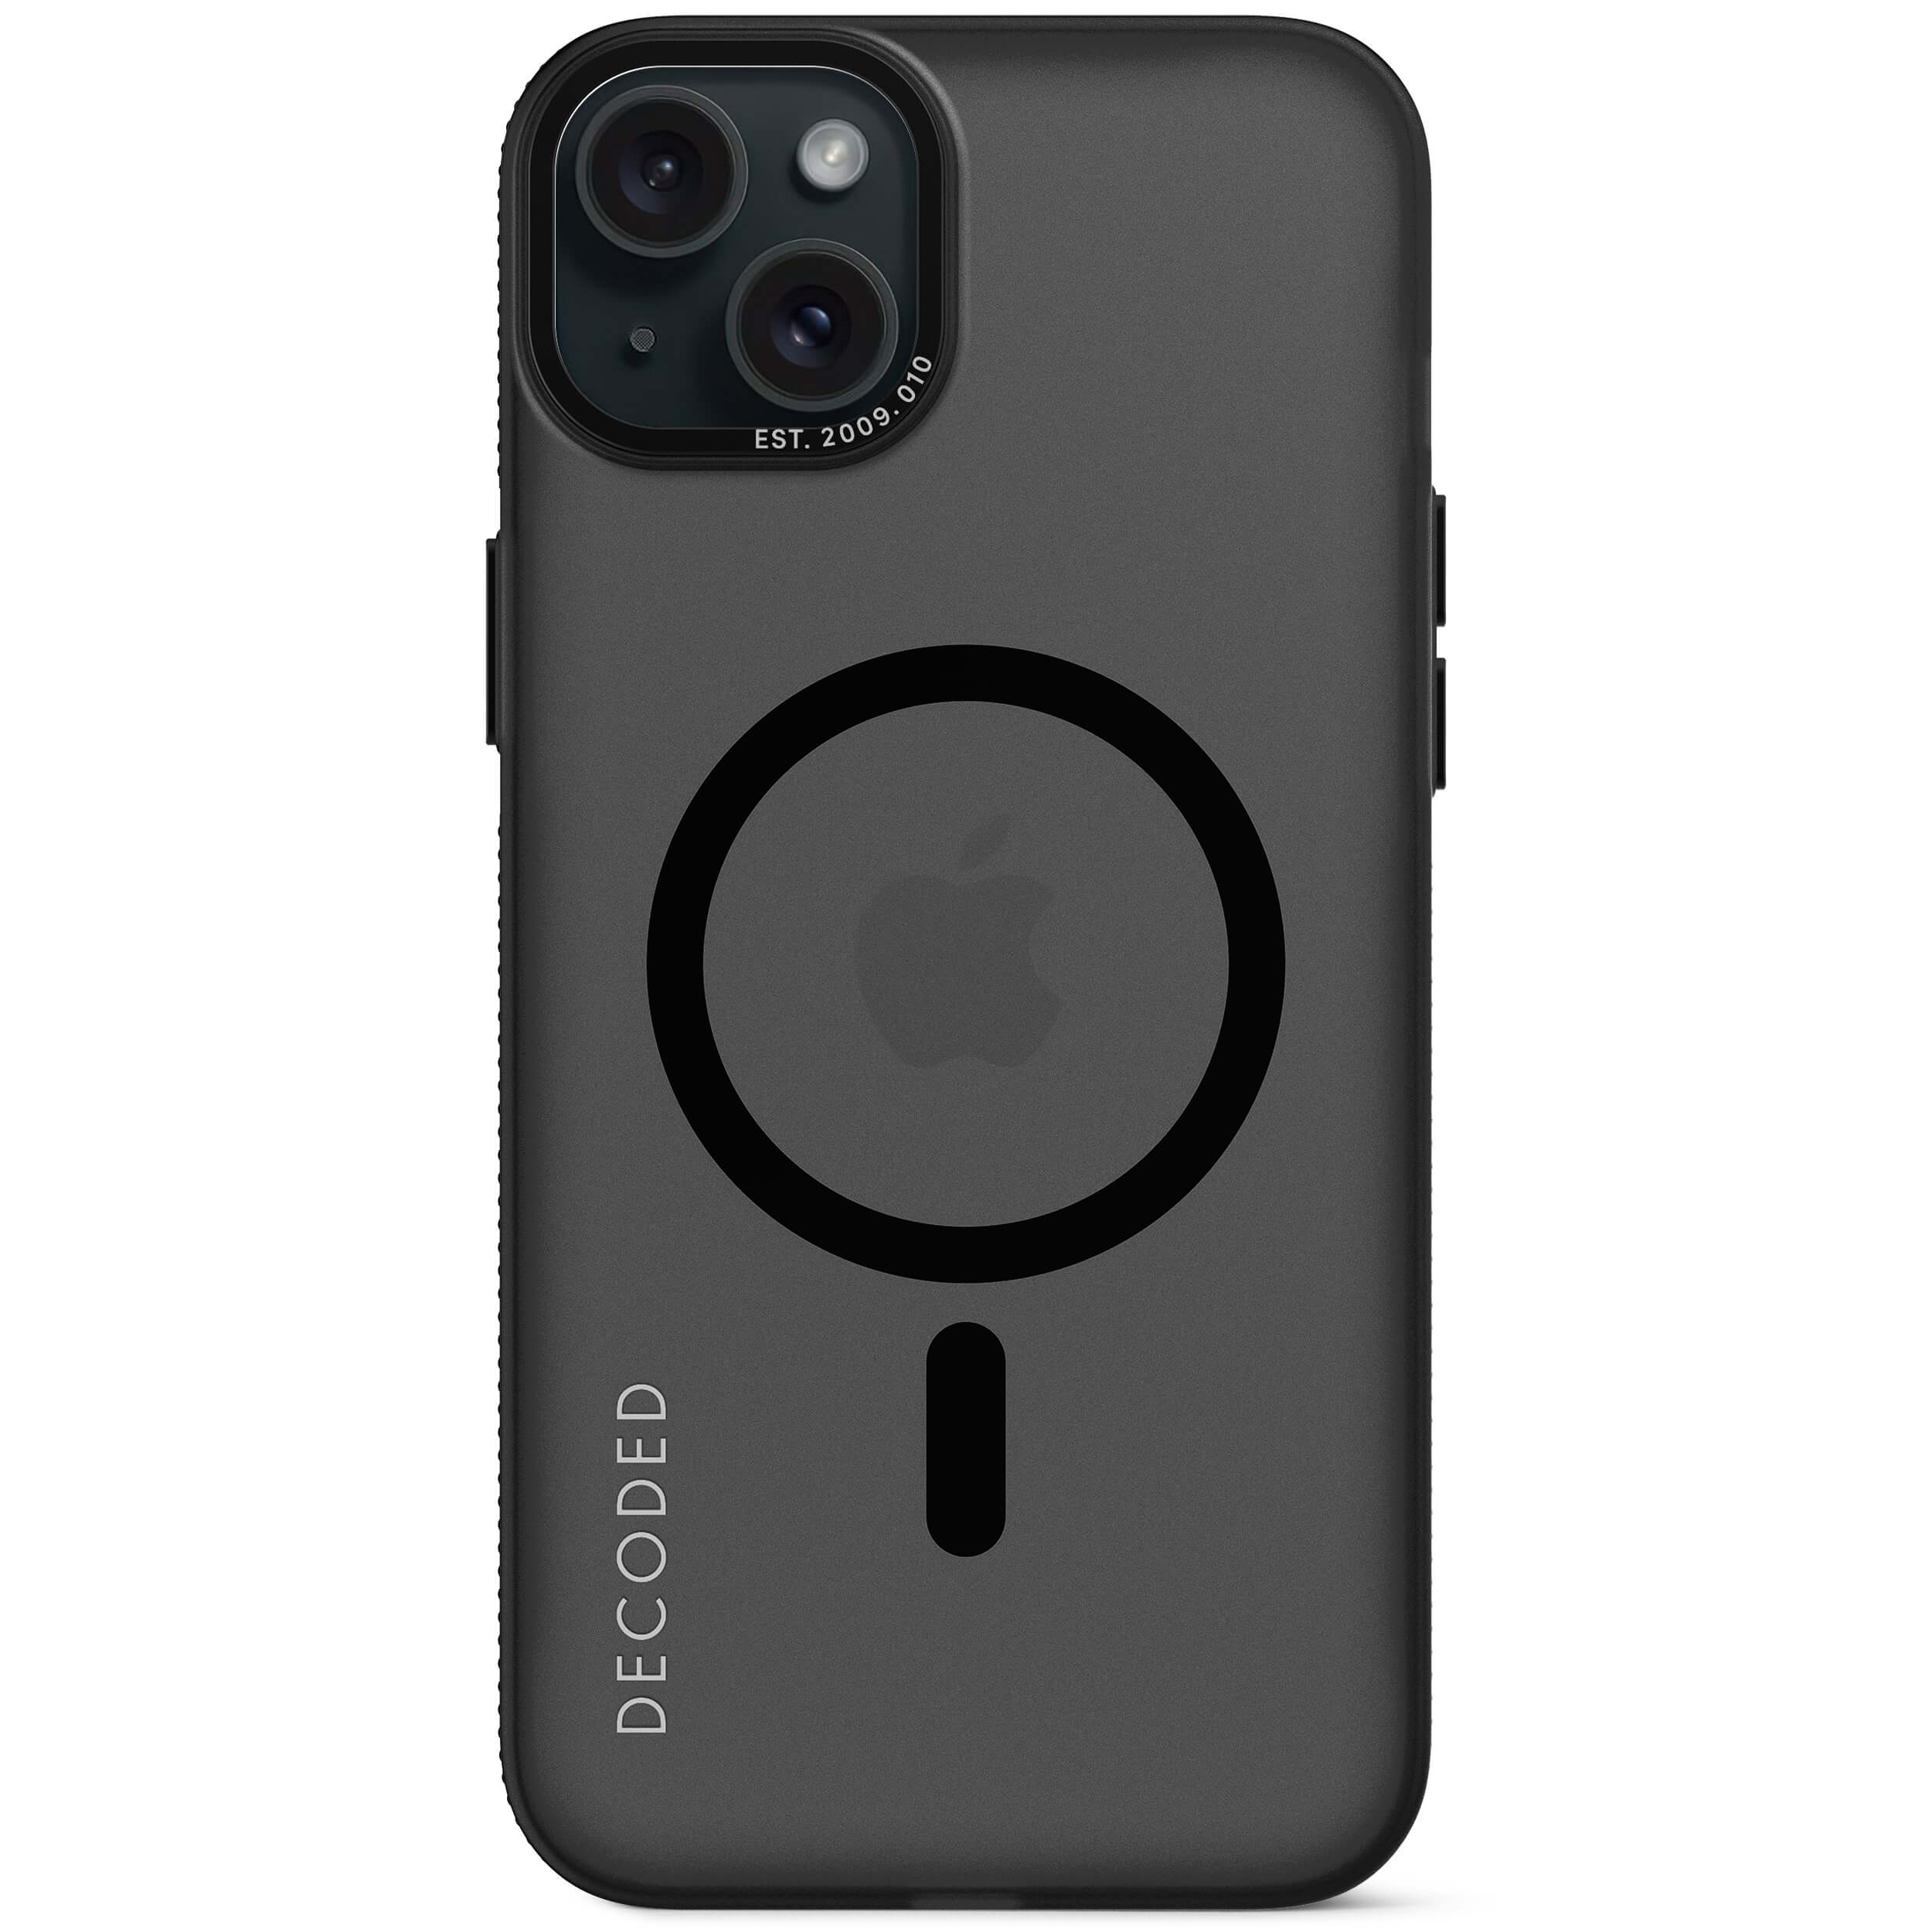 DECODED Recycled Plastic Grip Case, Transparant Black